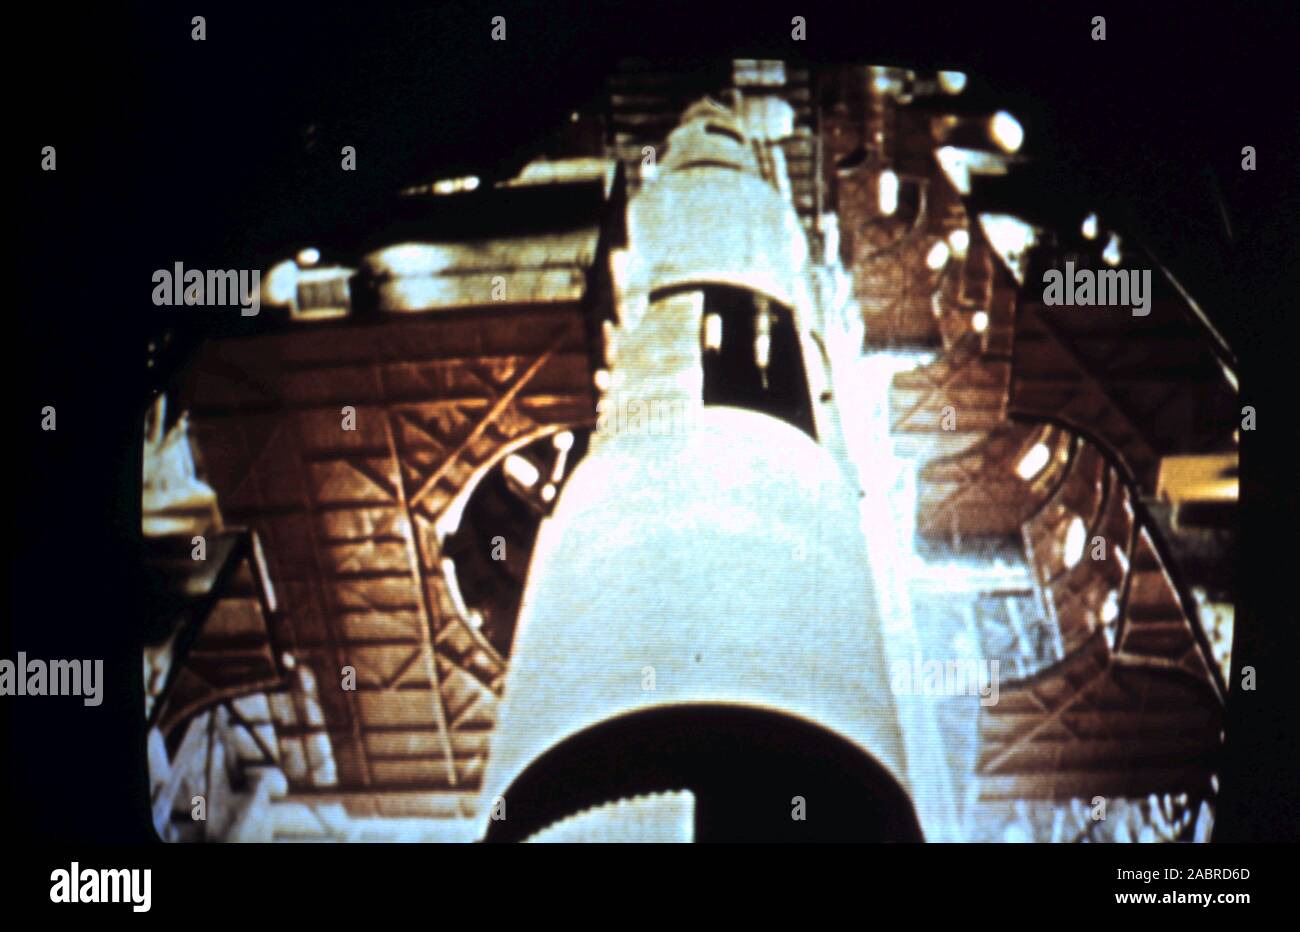 Teleclip - Saturn V - Apollo 11 - close-up; taken directly from color TV screen during live broadcast in the UK - 1969 Stock Photo